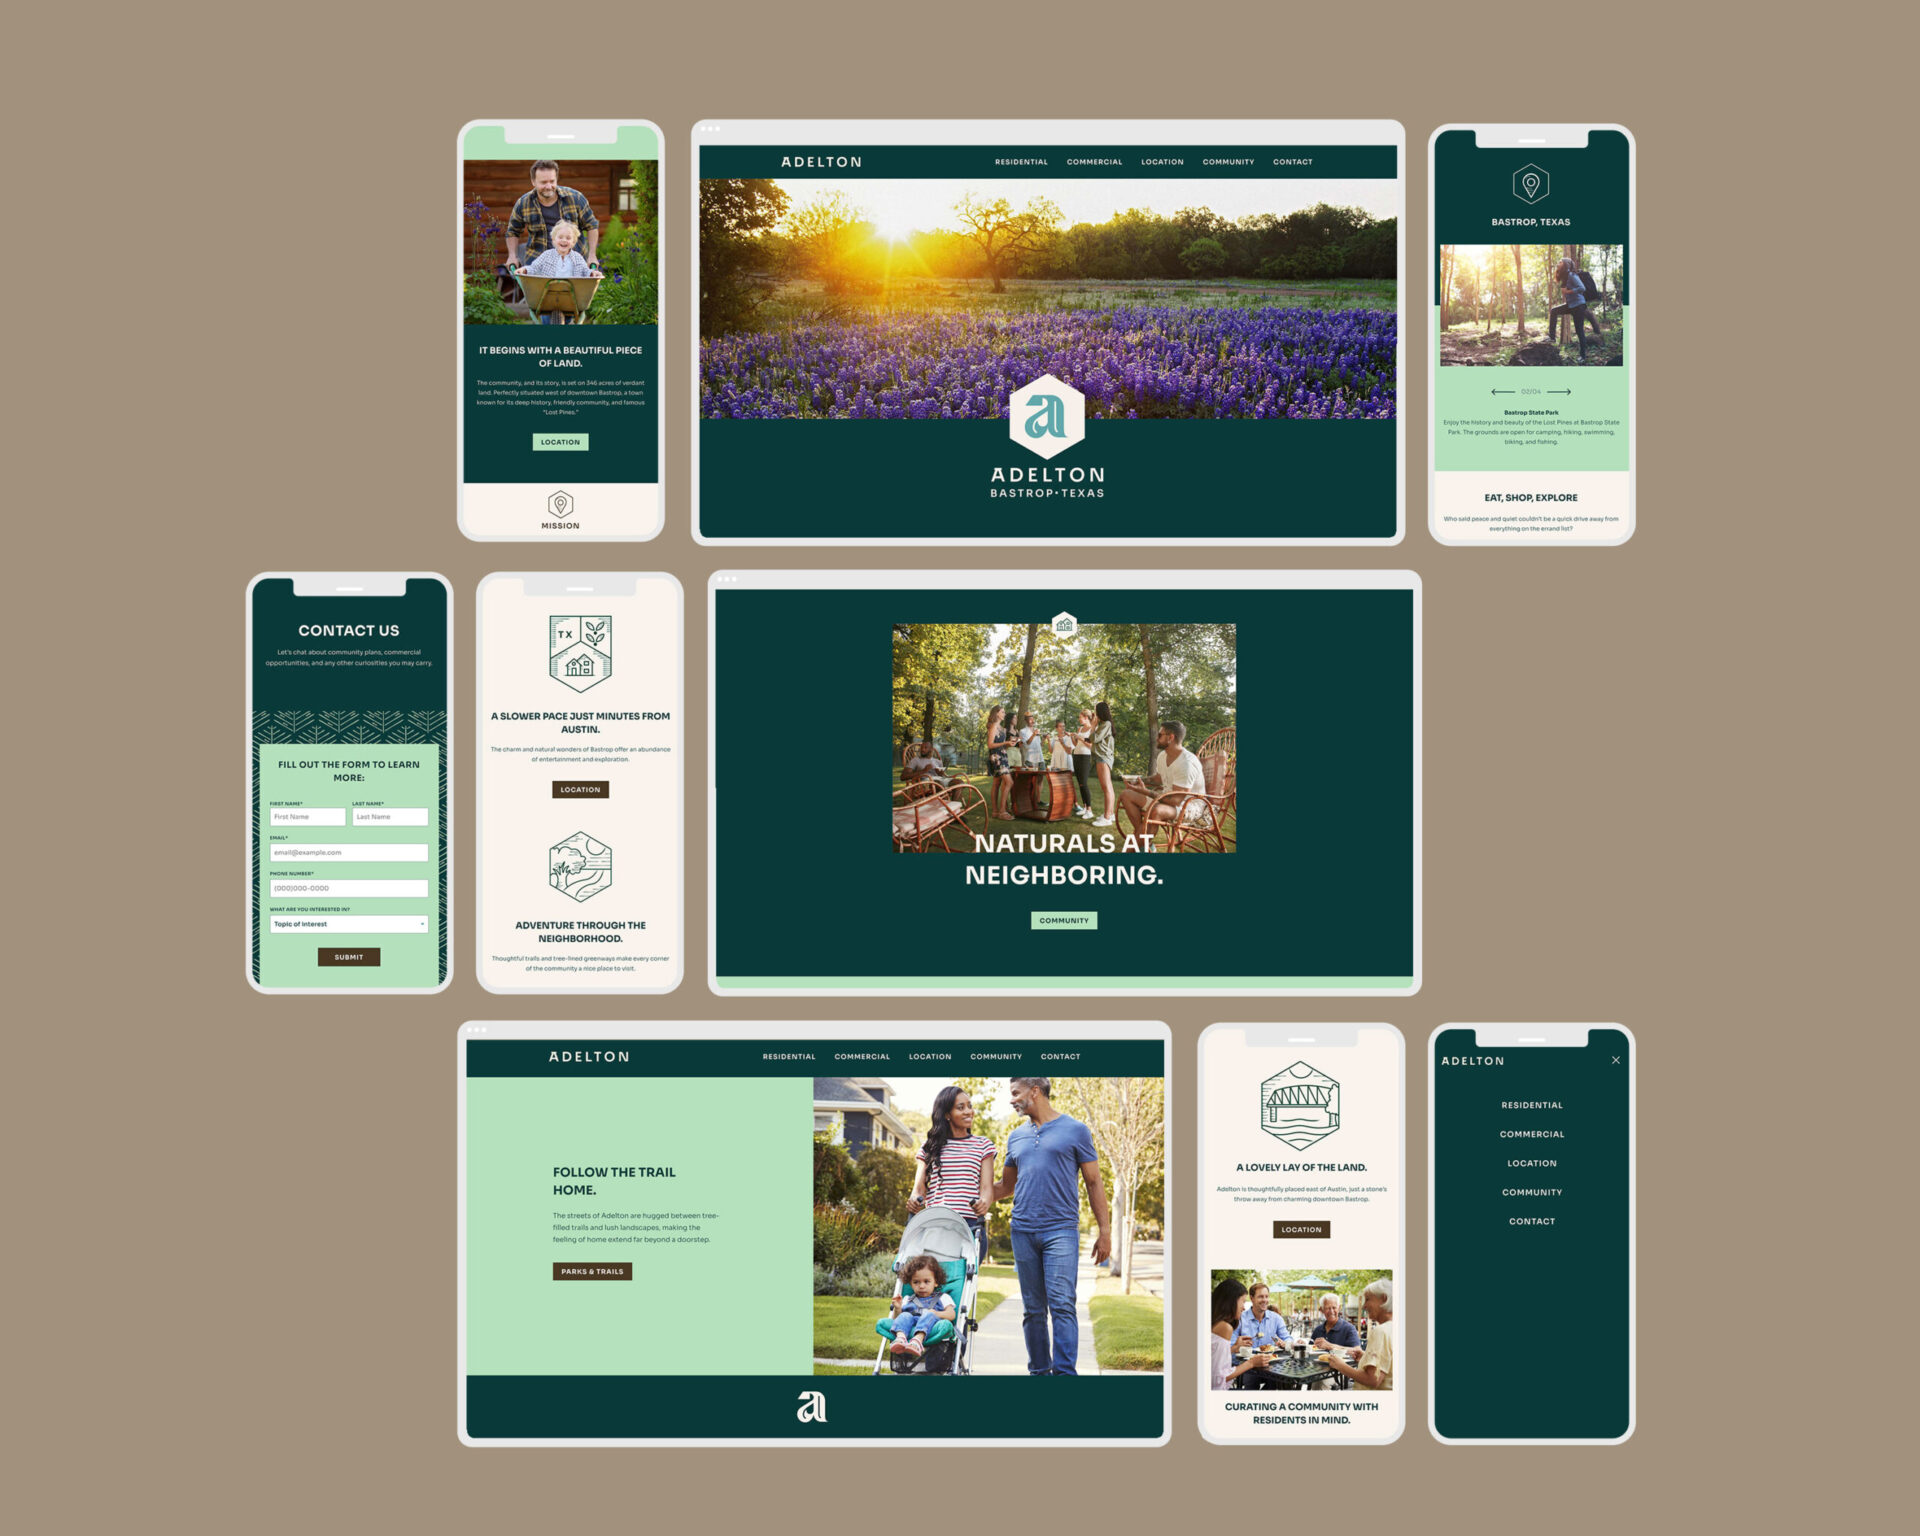 Screenshots laid out in mockups of a website with a green color scheme, featuring images of a community and nature.